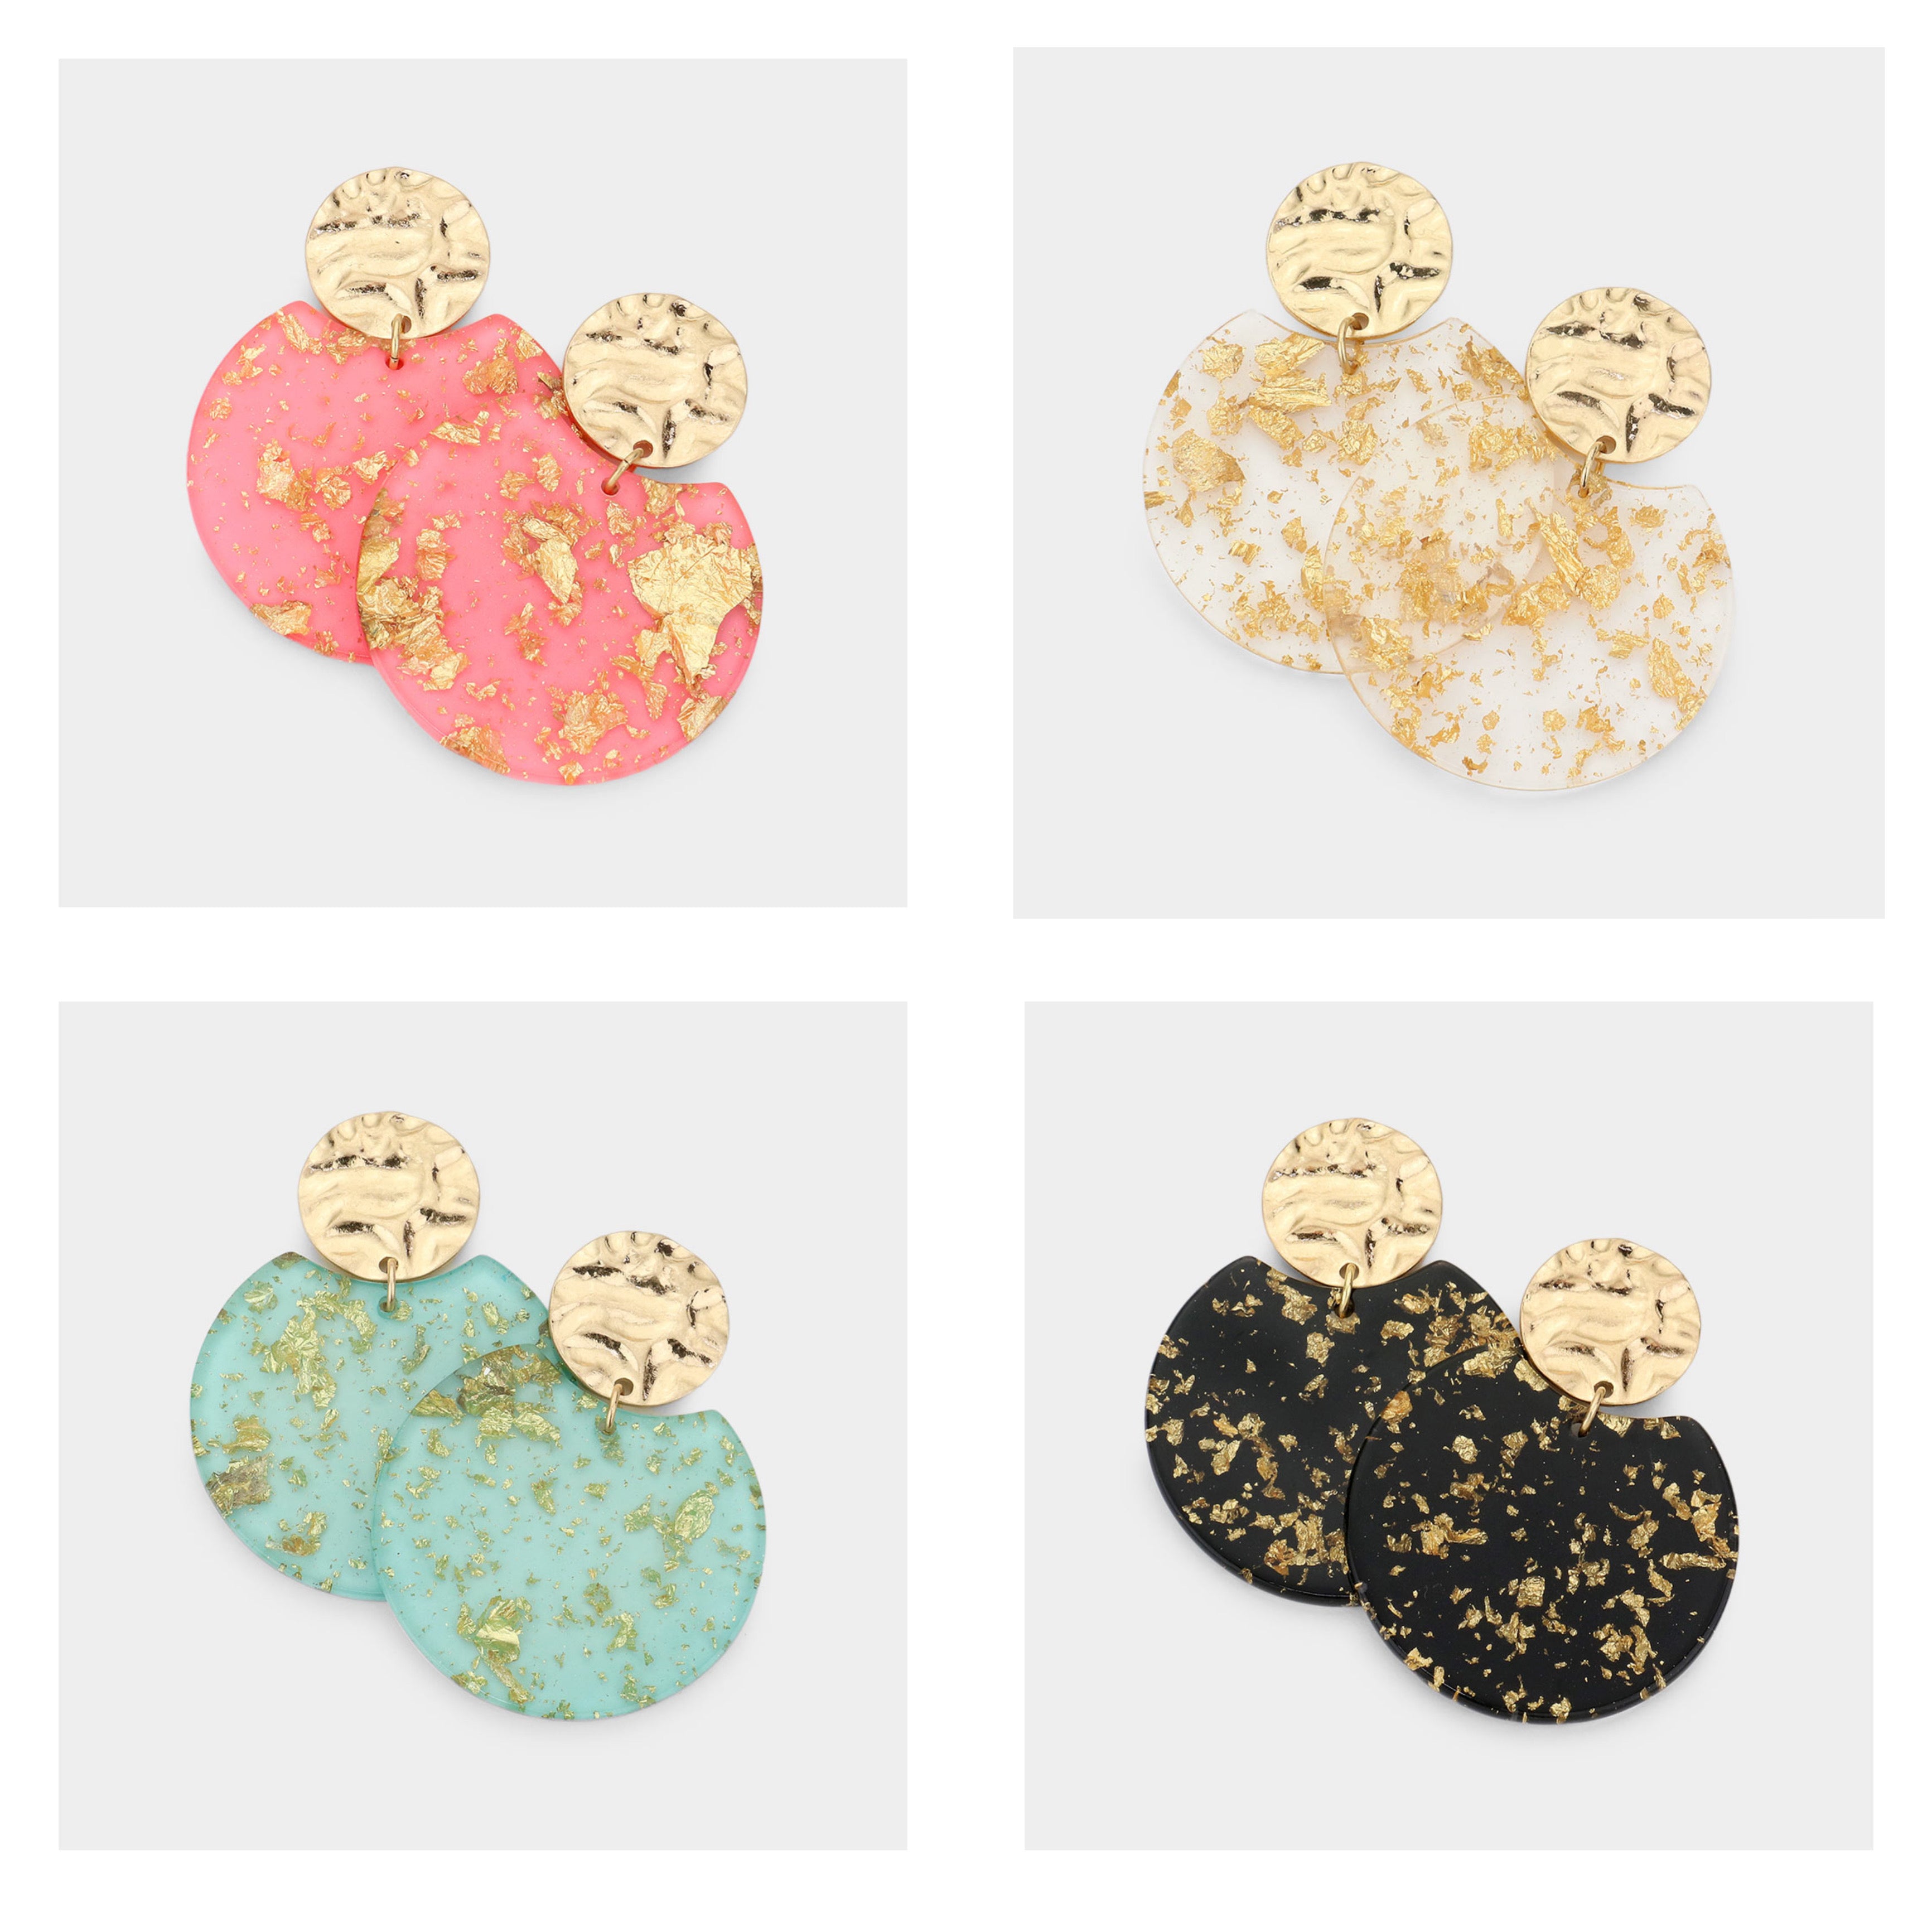 Gold flake round earrings